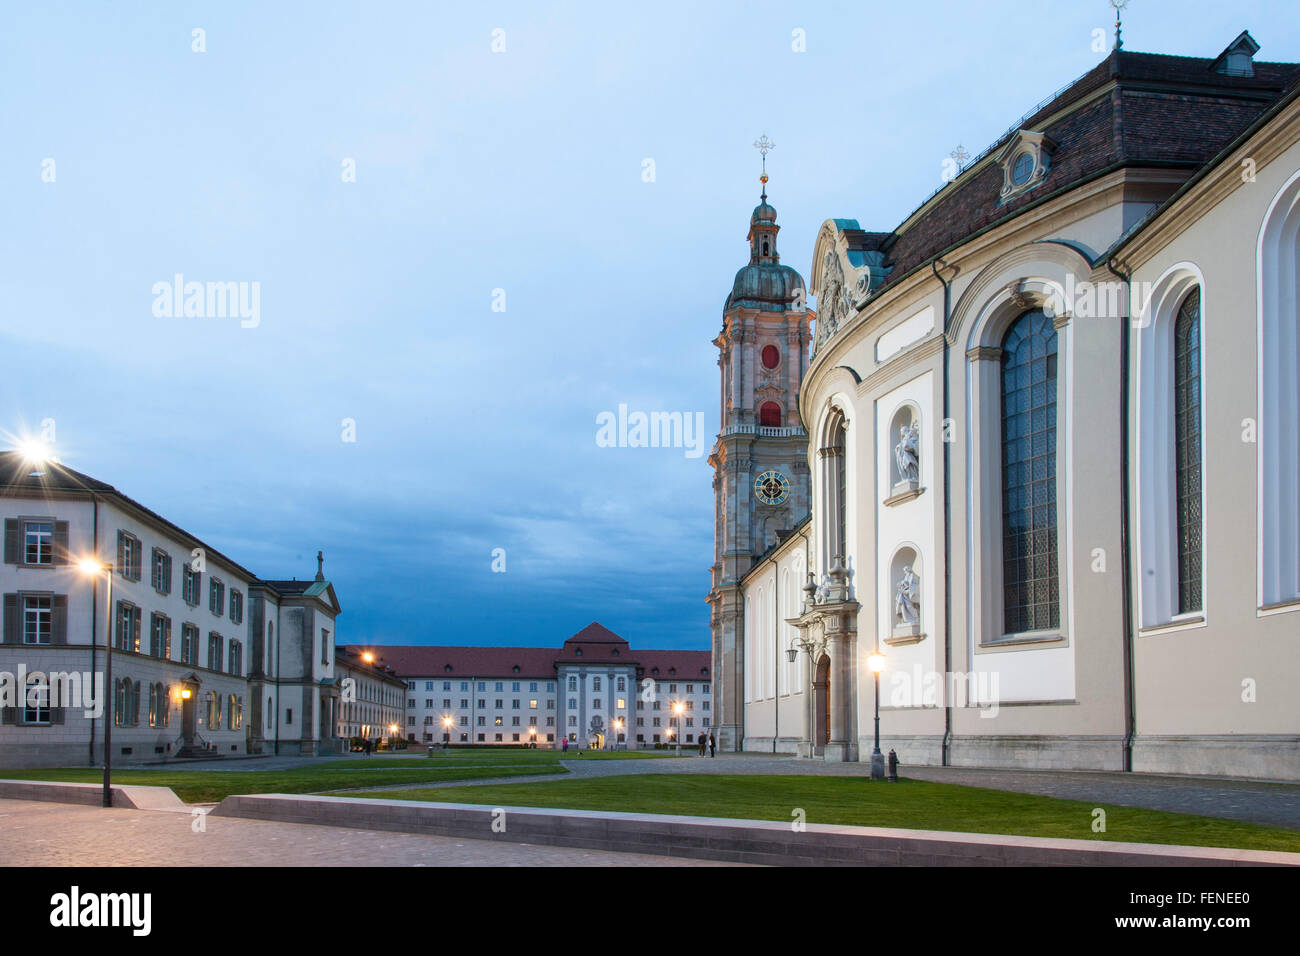 Cathedral (former collegiate church), at dusk, UNESCO World Heritage Site Convent of St Gall, Canton St. Gallen, Switzerland Stock Photo